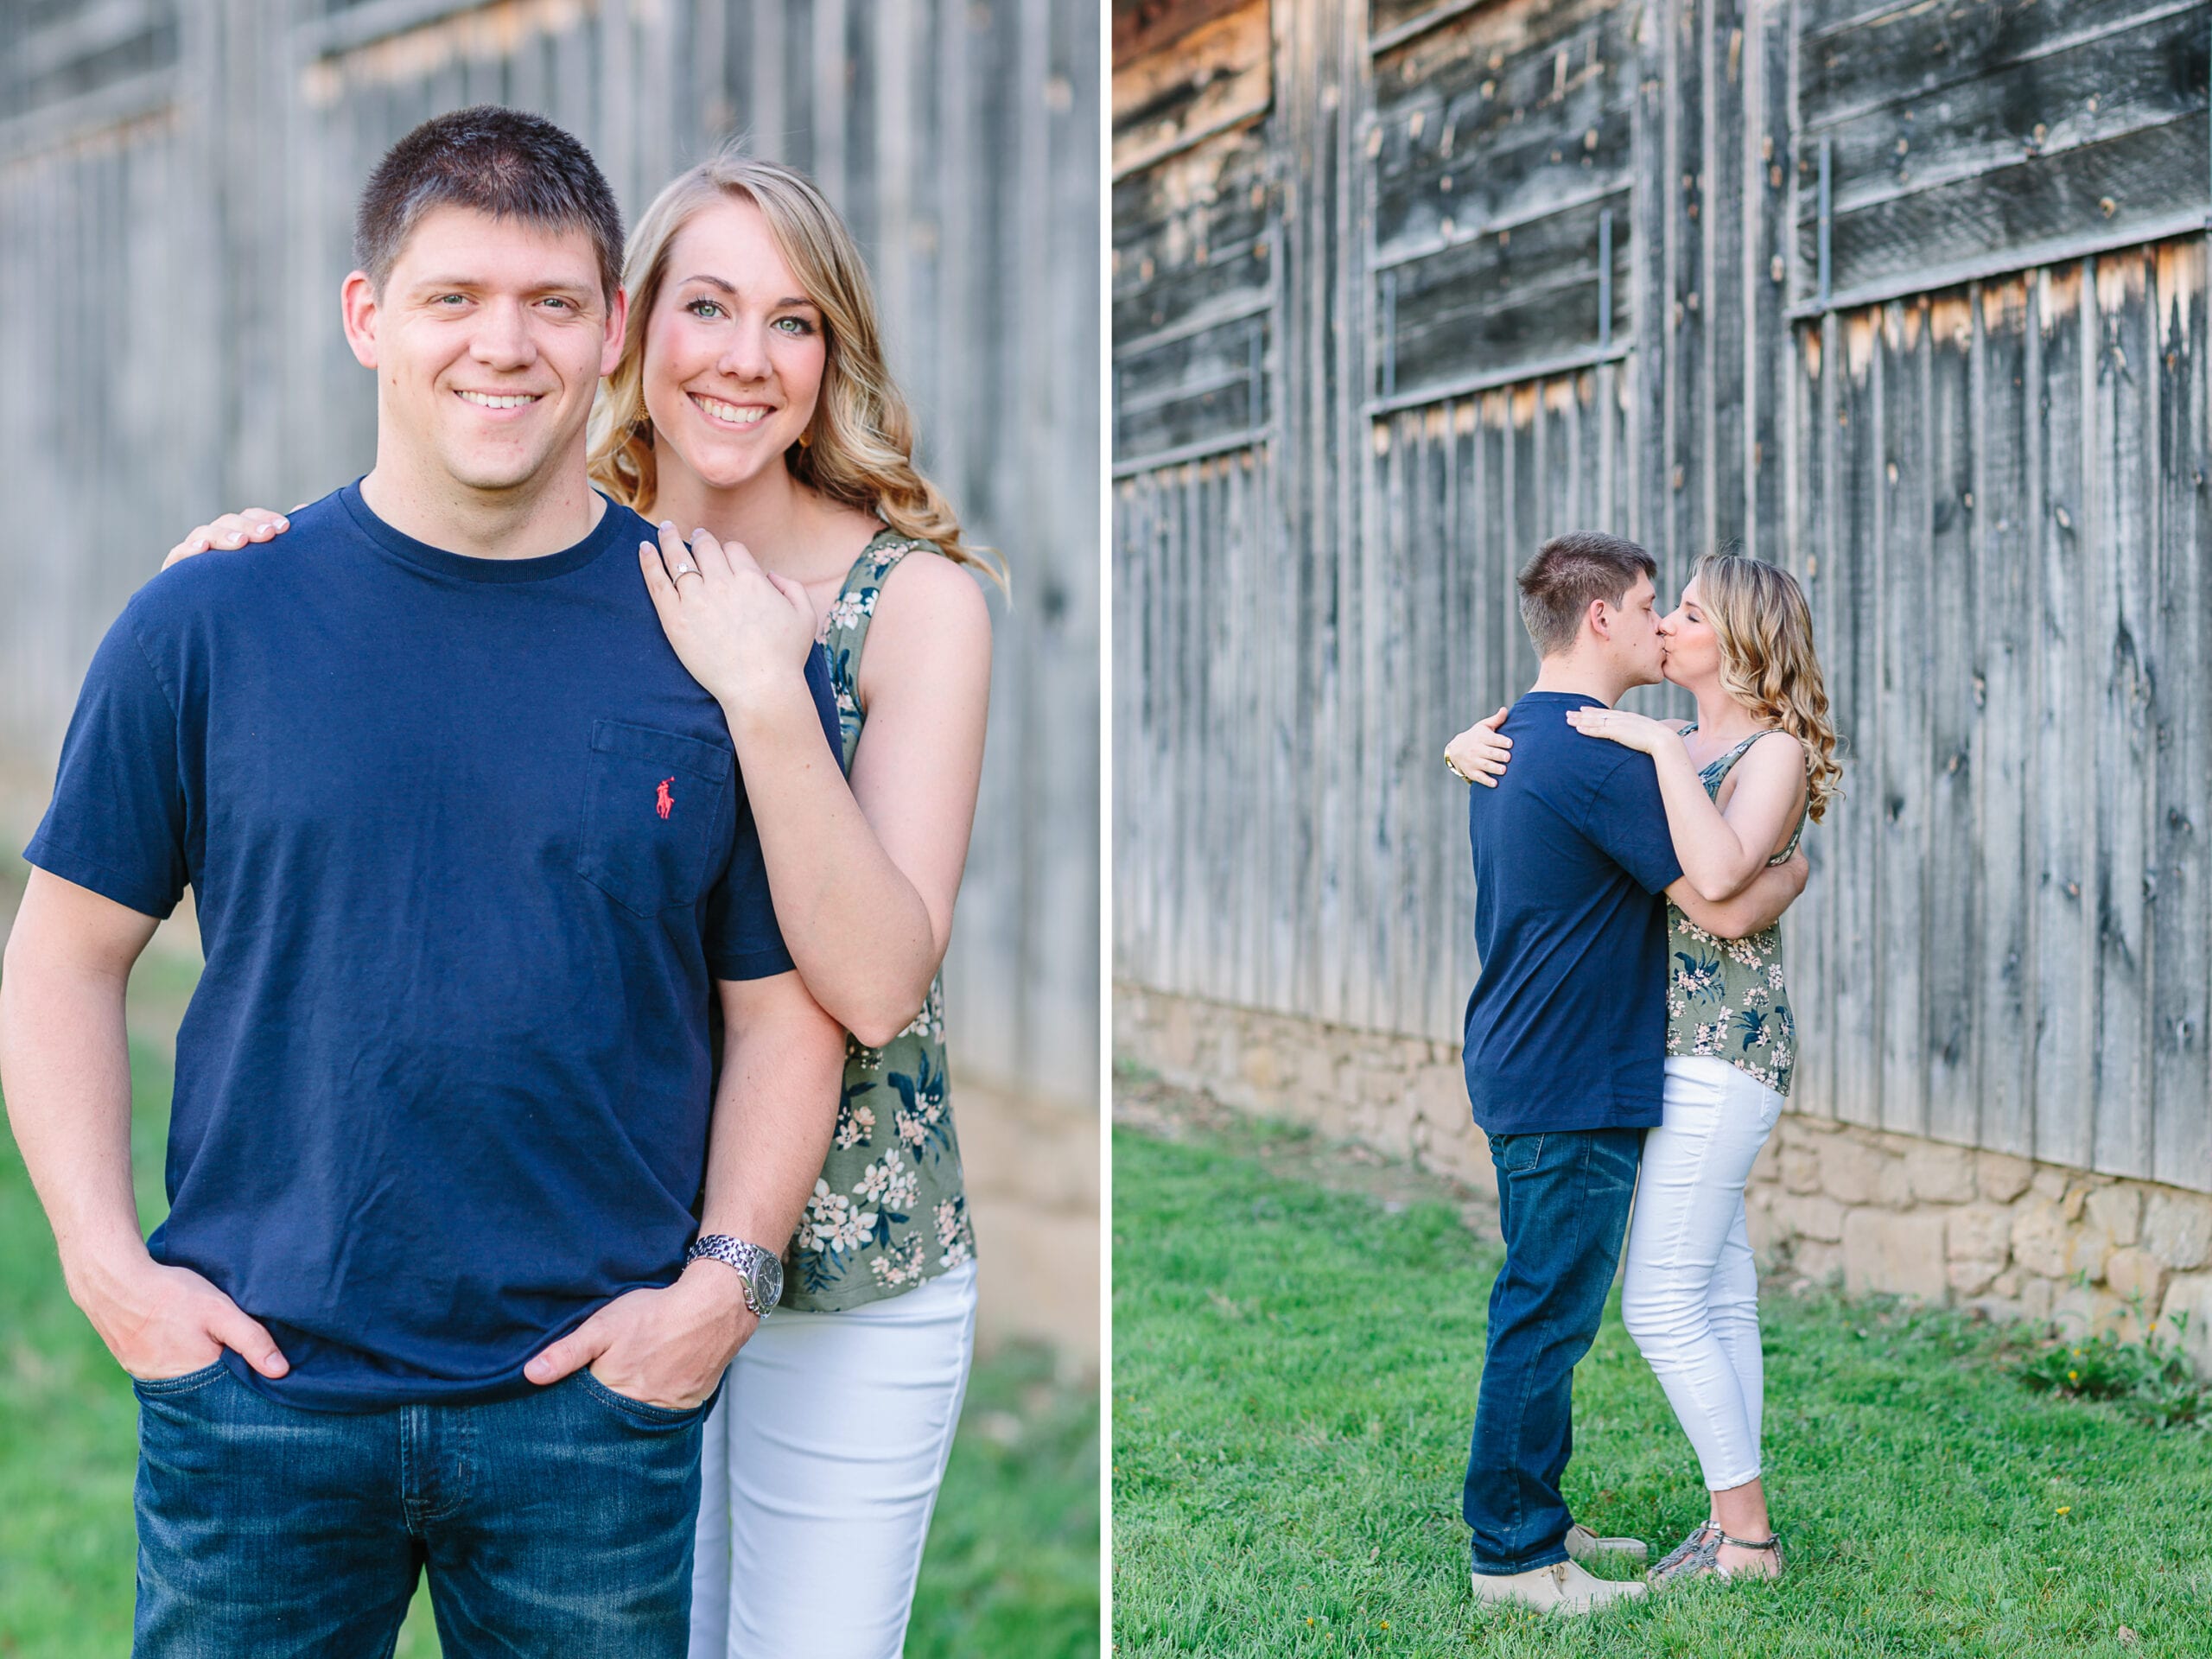 Union Mills Homestead Engagement Session by Lauren Myers Photography